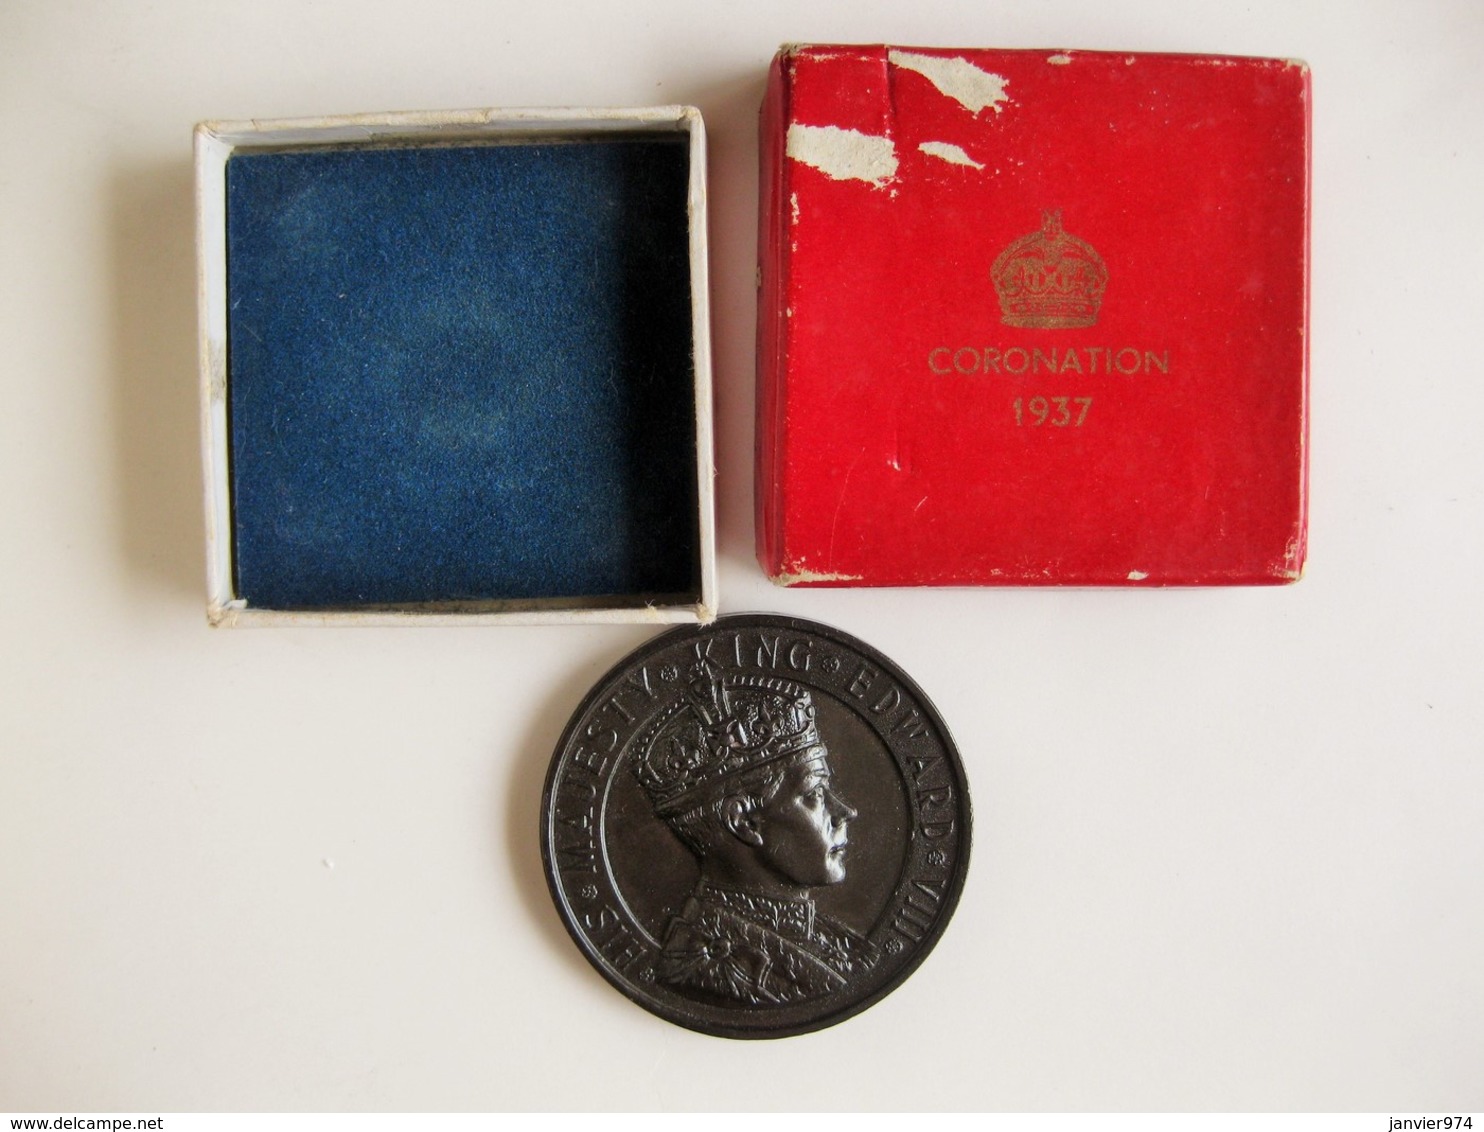 Medaille Et Boite. Edward VIII Coronation Medal Crowned 1937 - Royal/Of Nobility